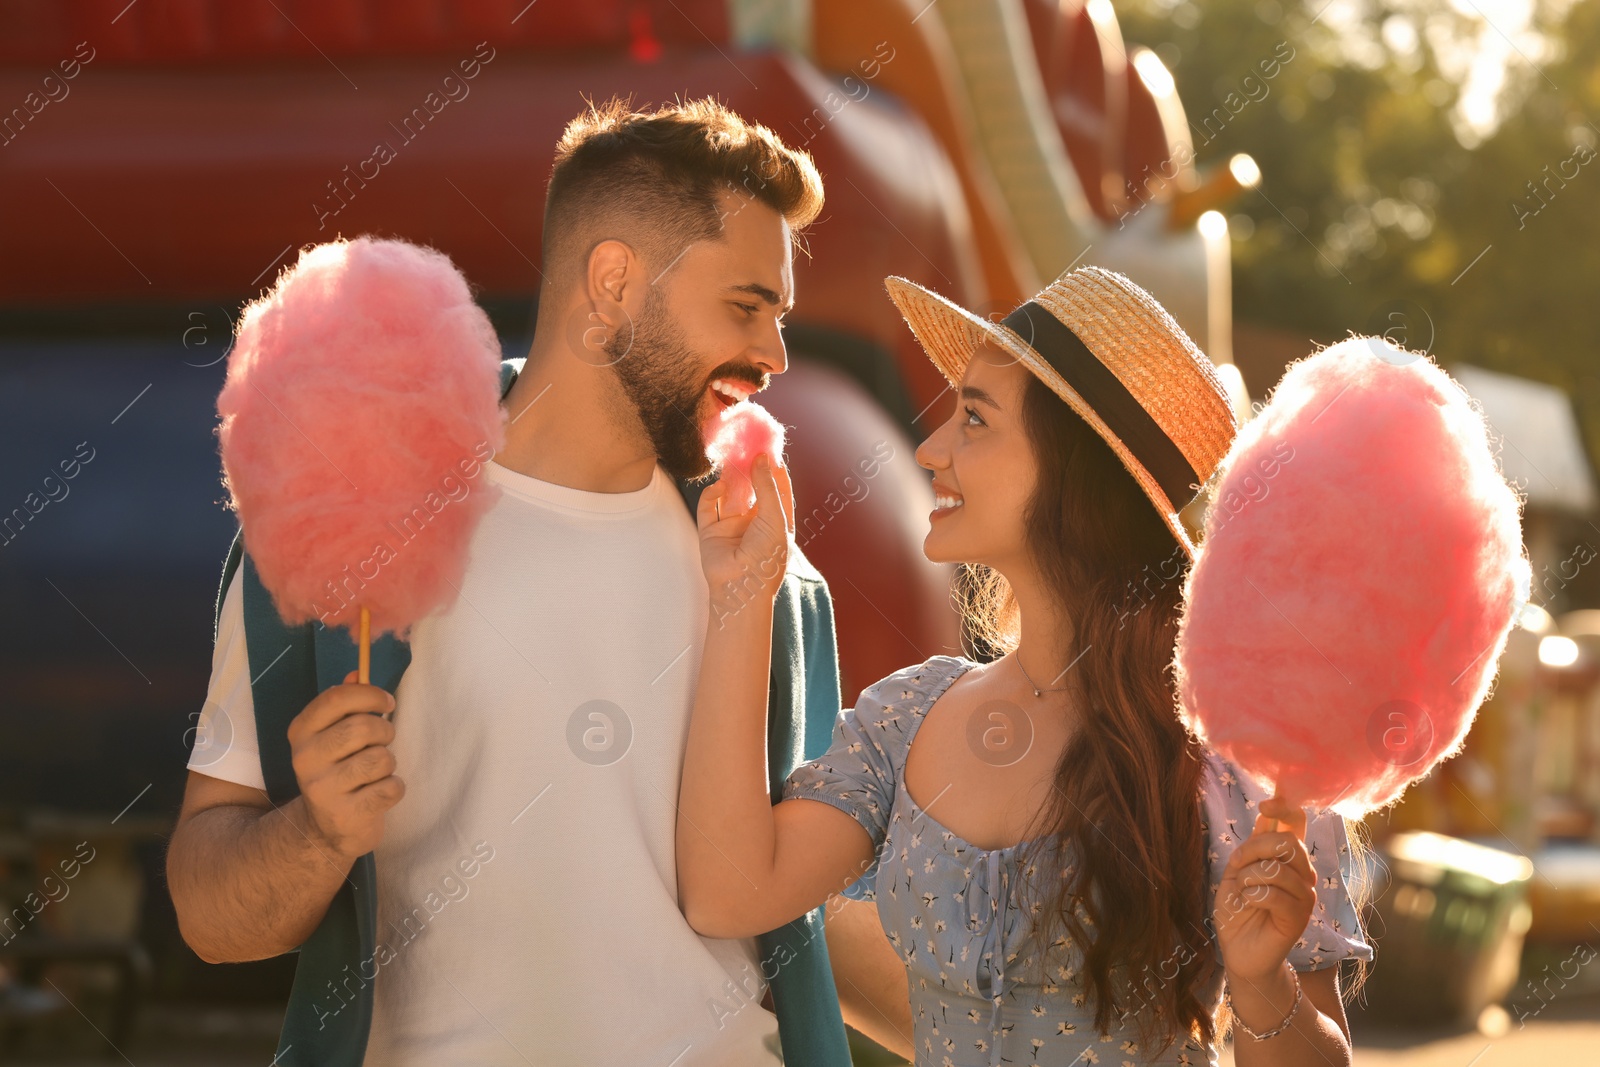 Photo of Happy couple with cotton candies at funfair